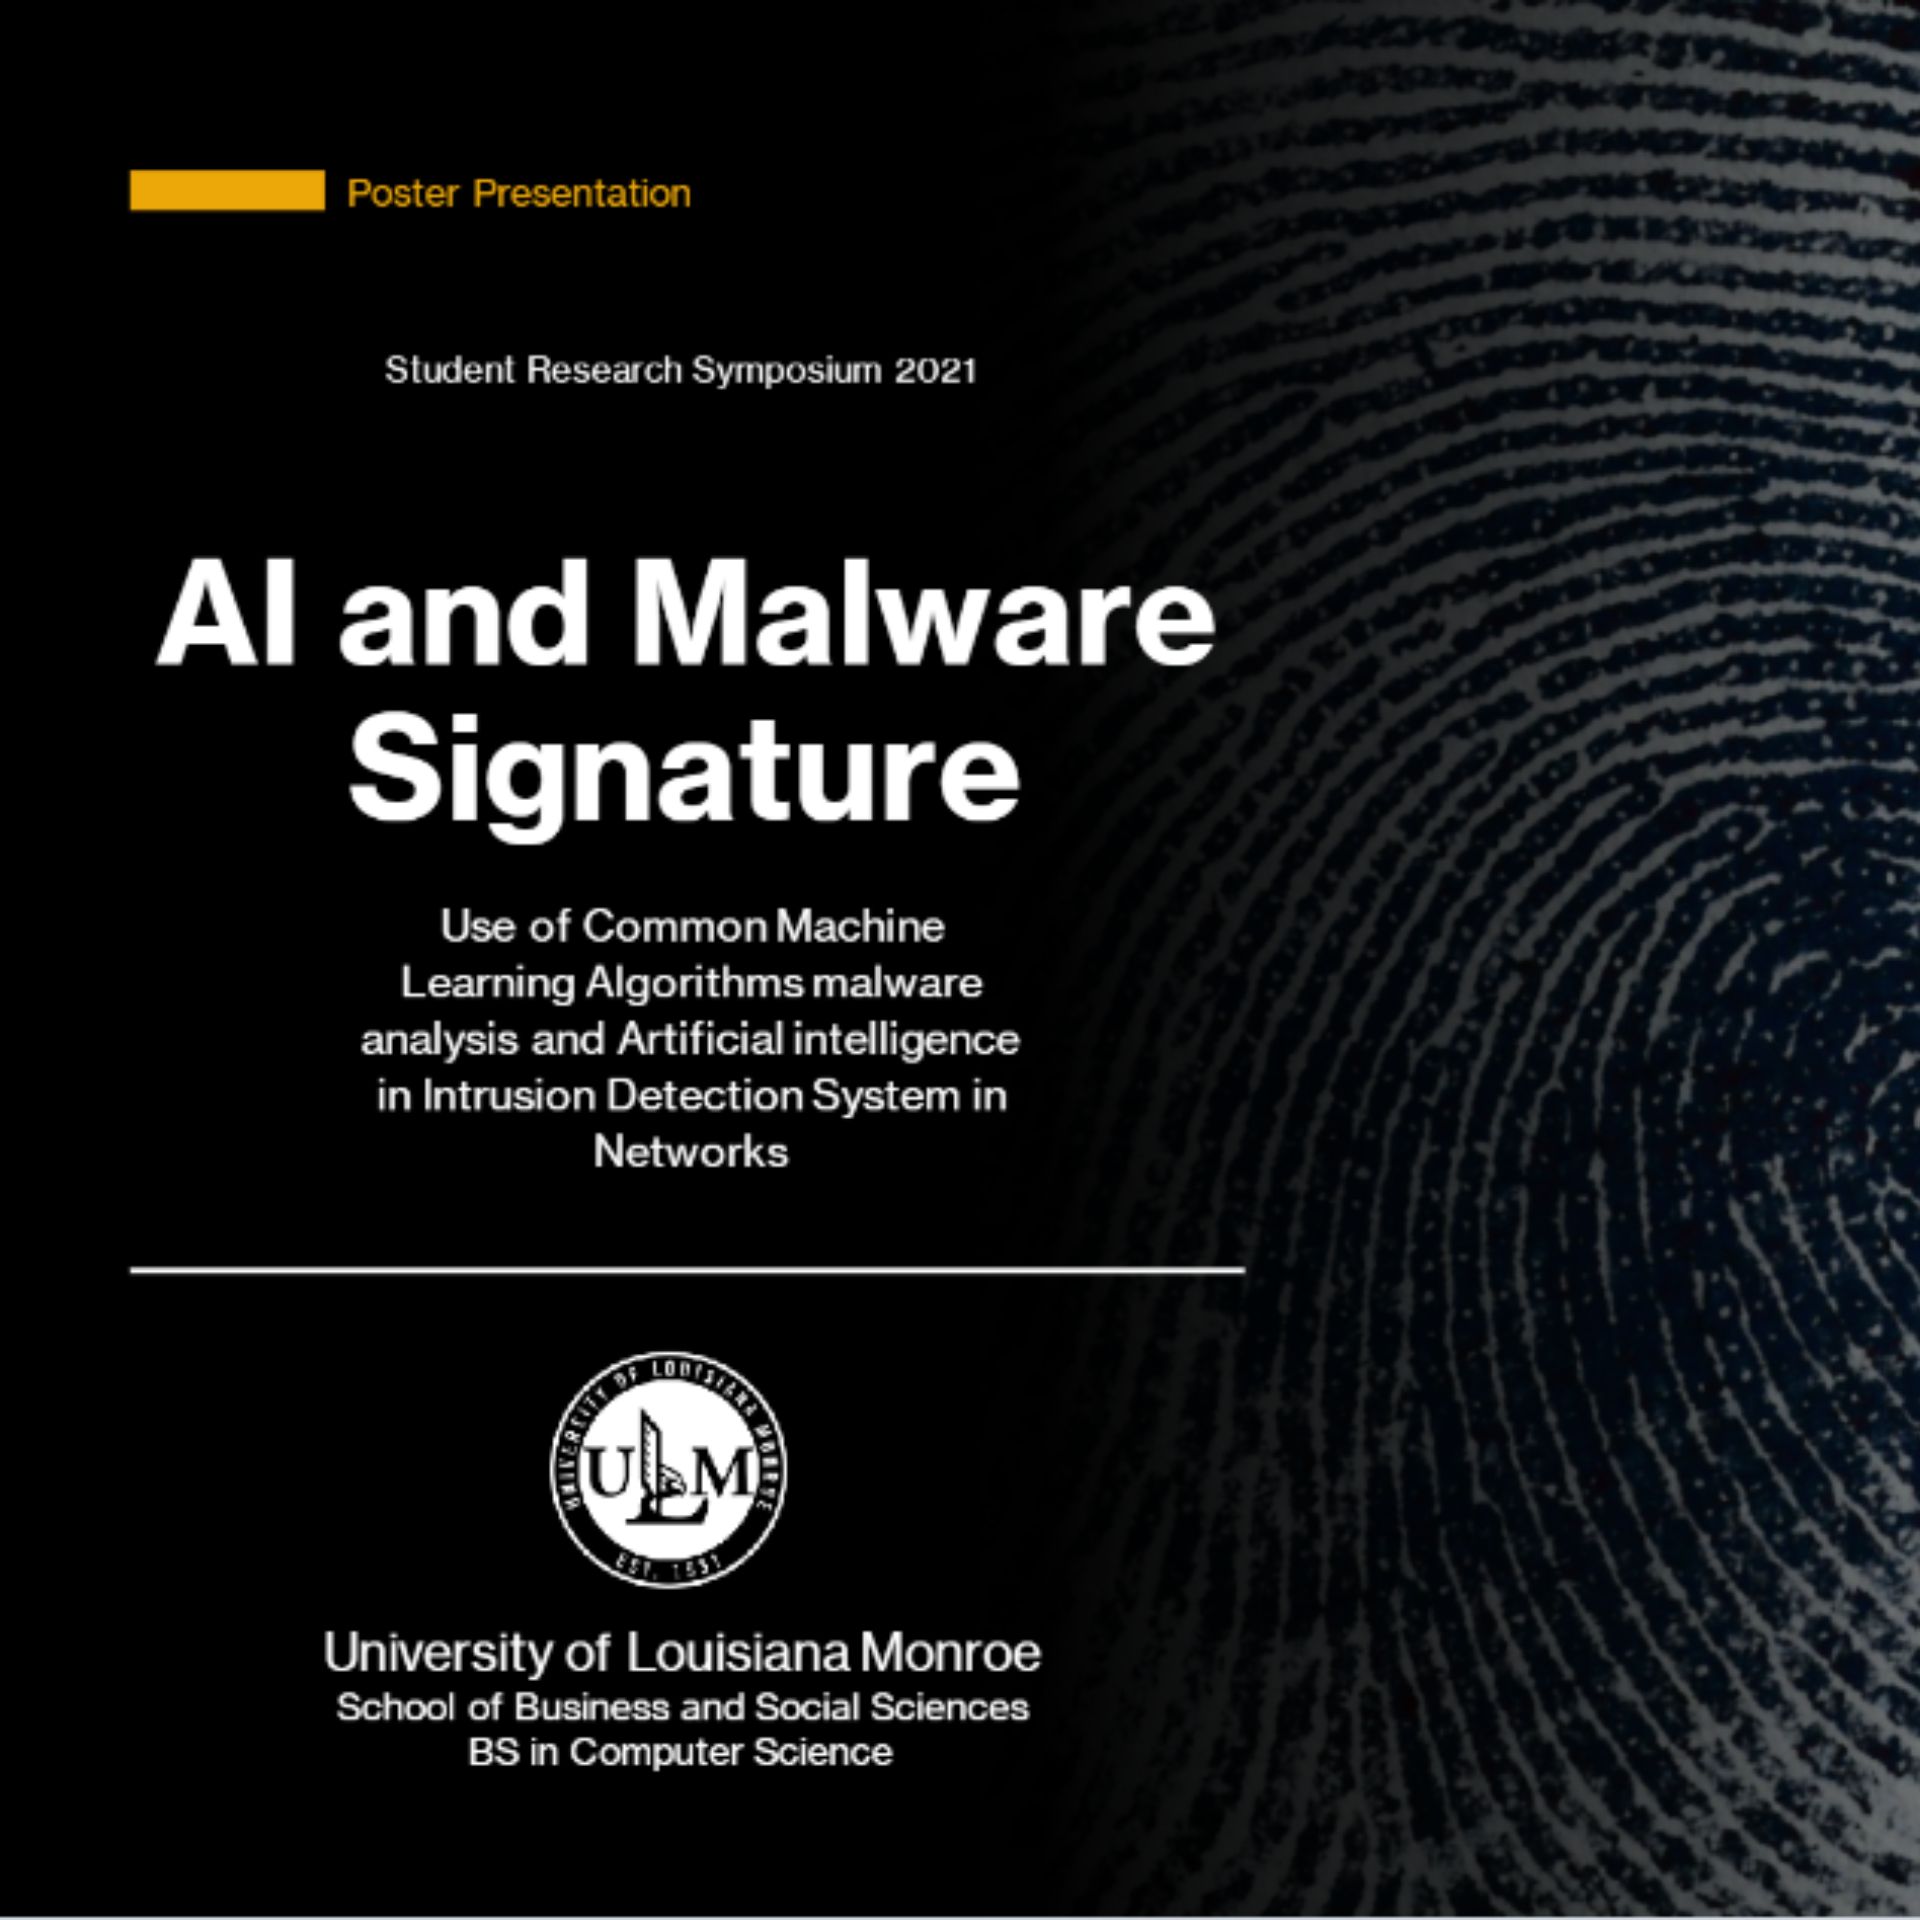 Student Research Symposium 2021 AI and Malware Signature